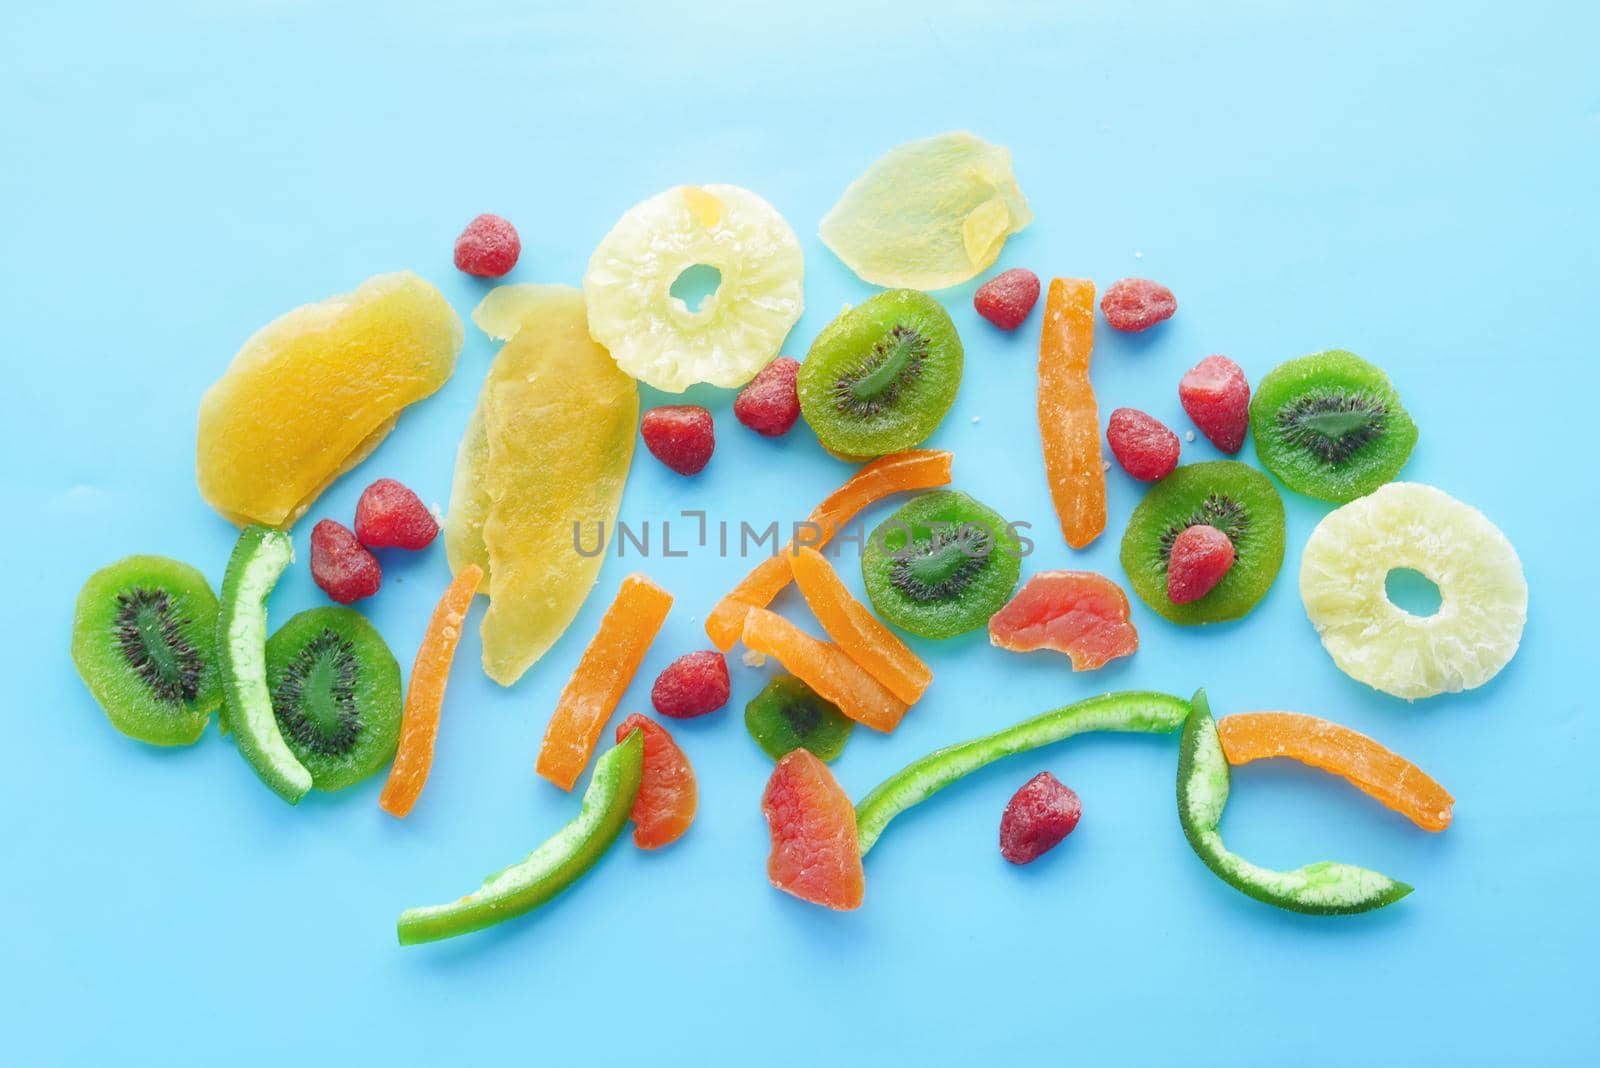 Dried fruits and berries on blue background .